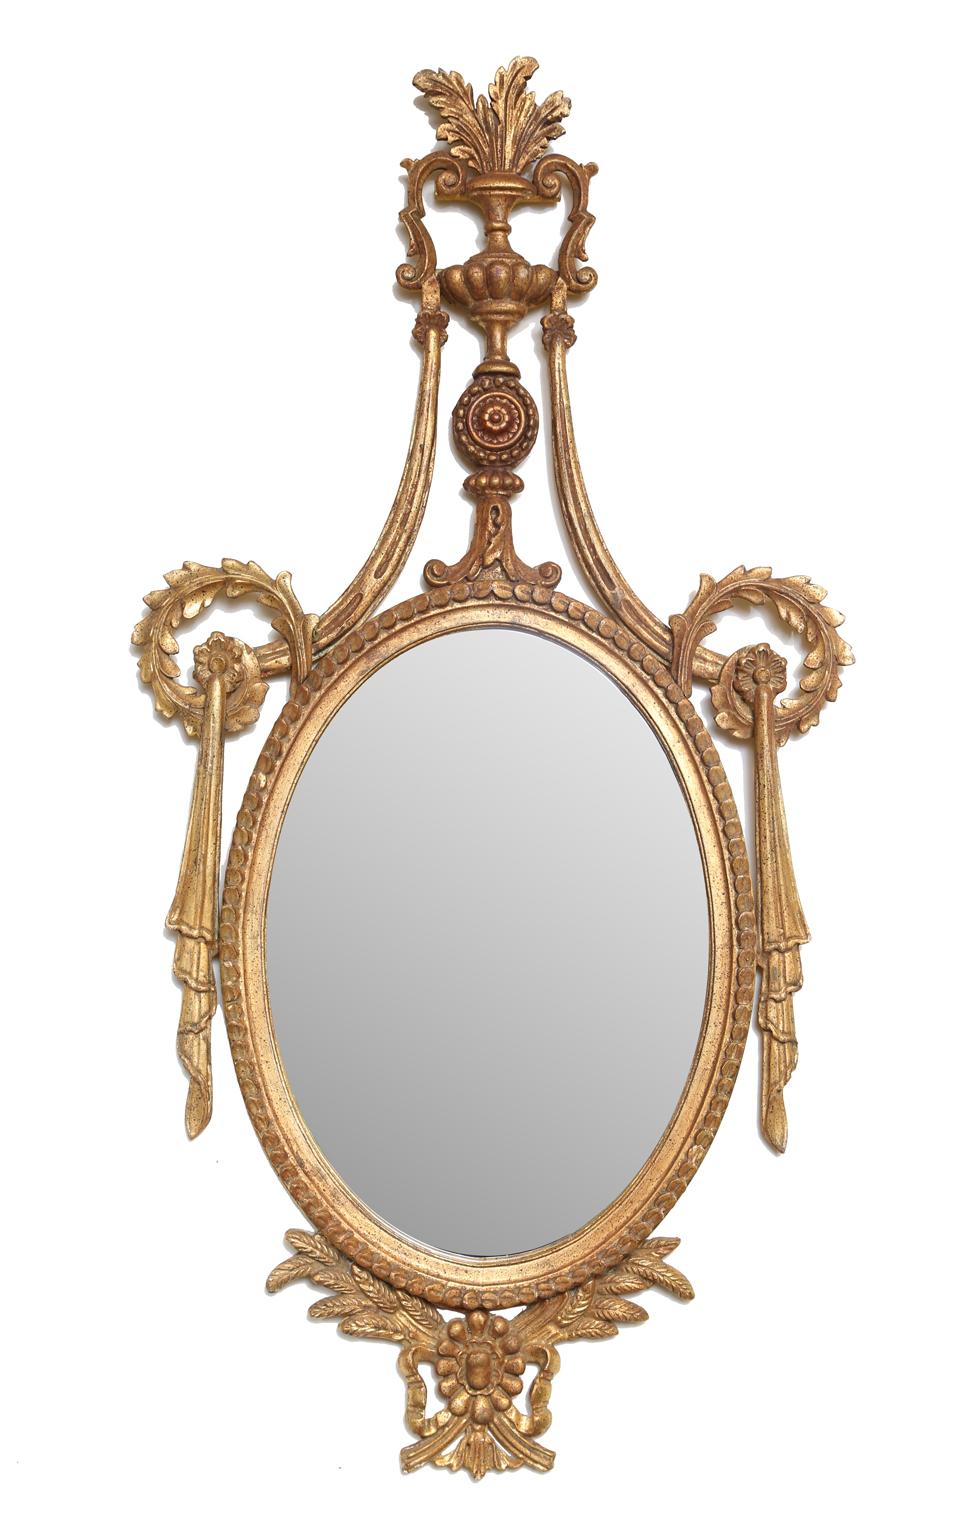 Pair of mirrors, in richly carved giltwood frame, each having an oval mirrorplate, with border of gadrooning, surmounted by elaborate pediment of acanthus-filled urn, over rosette, flanked by swags and scrolls, its base adorned by wheat, ribbons,